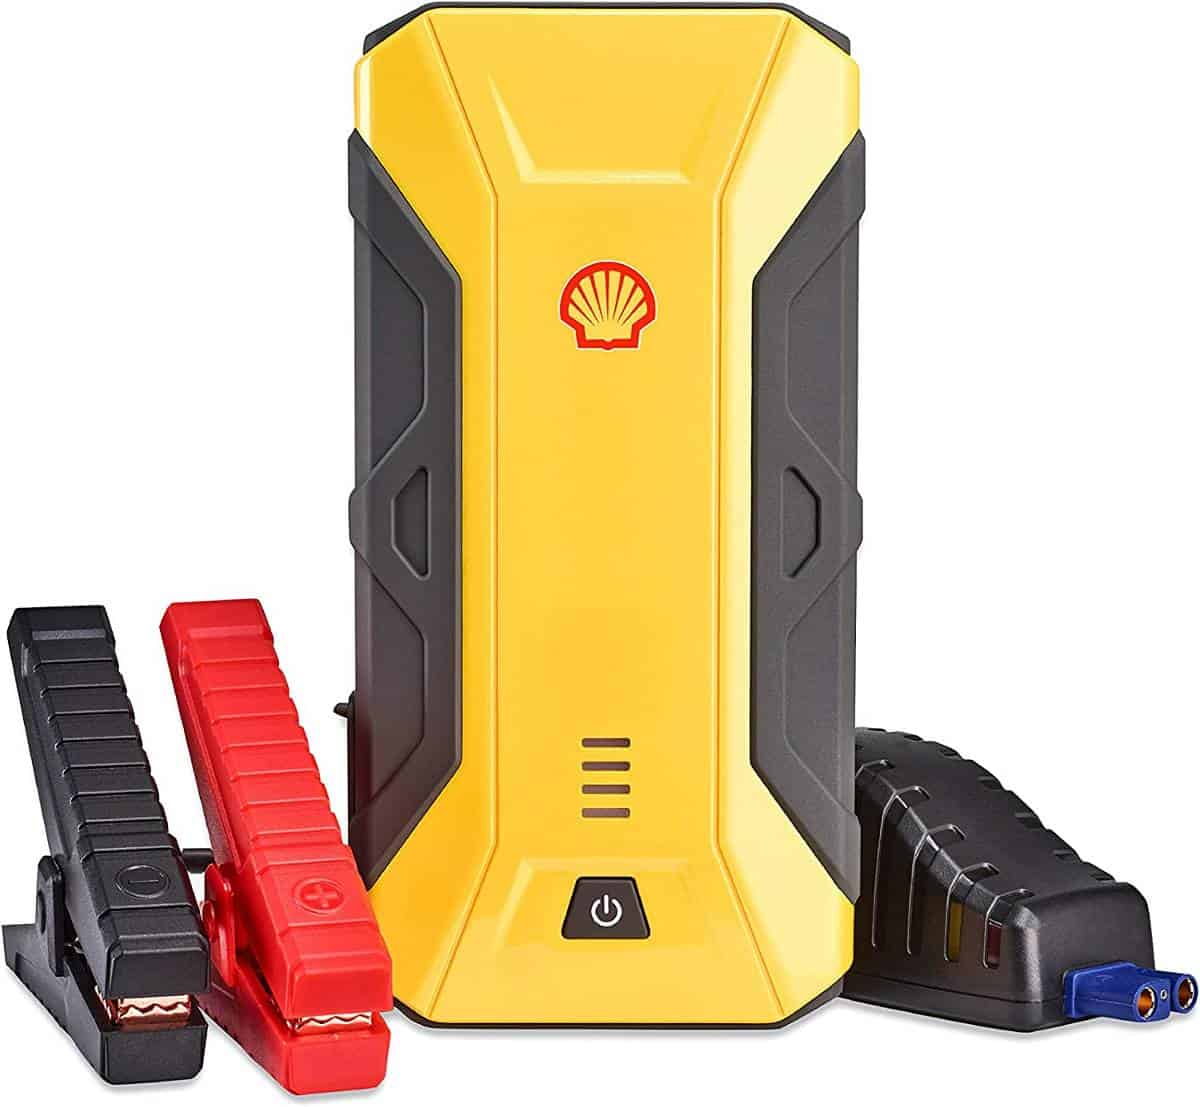 Shell Portable Lithium Jump Starter is another must-have for van life